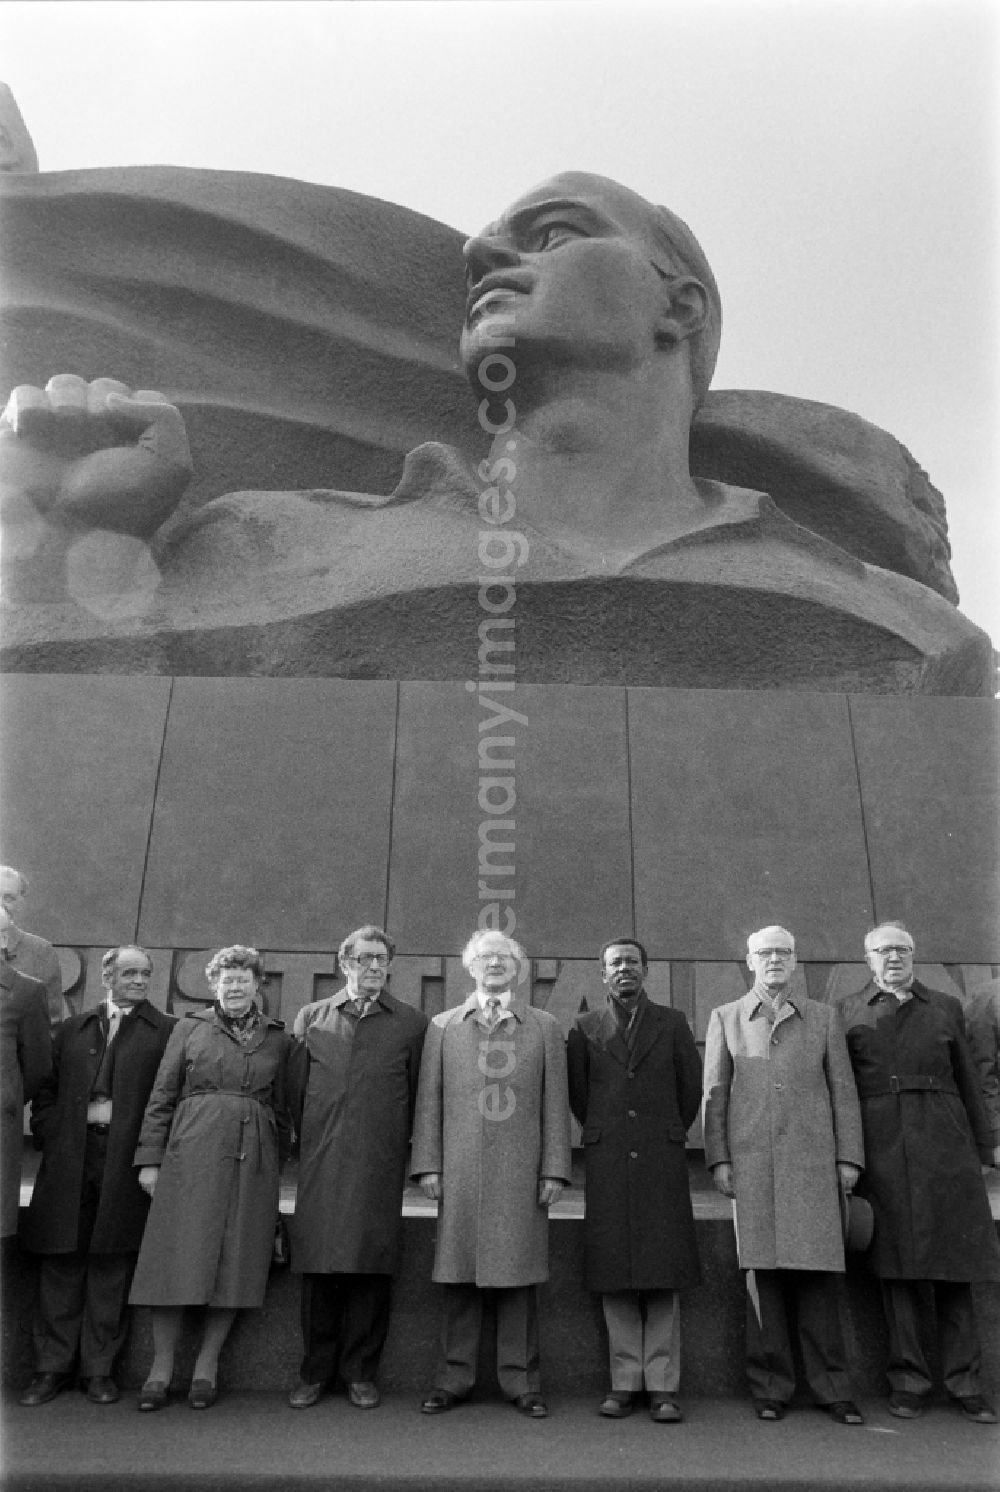 GDR picture archive: Berlin - Inauguration of Thaelmannpark with Erich Honecker, General Secretary of the SED, in Berlin